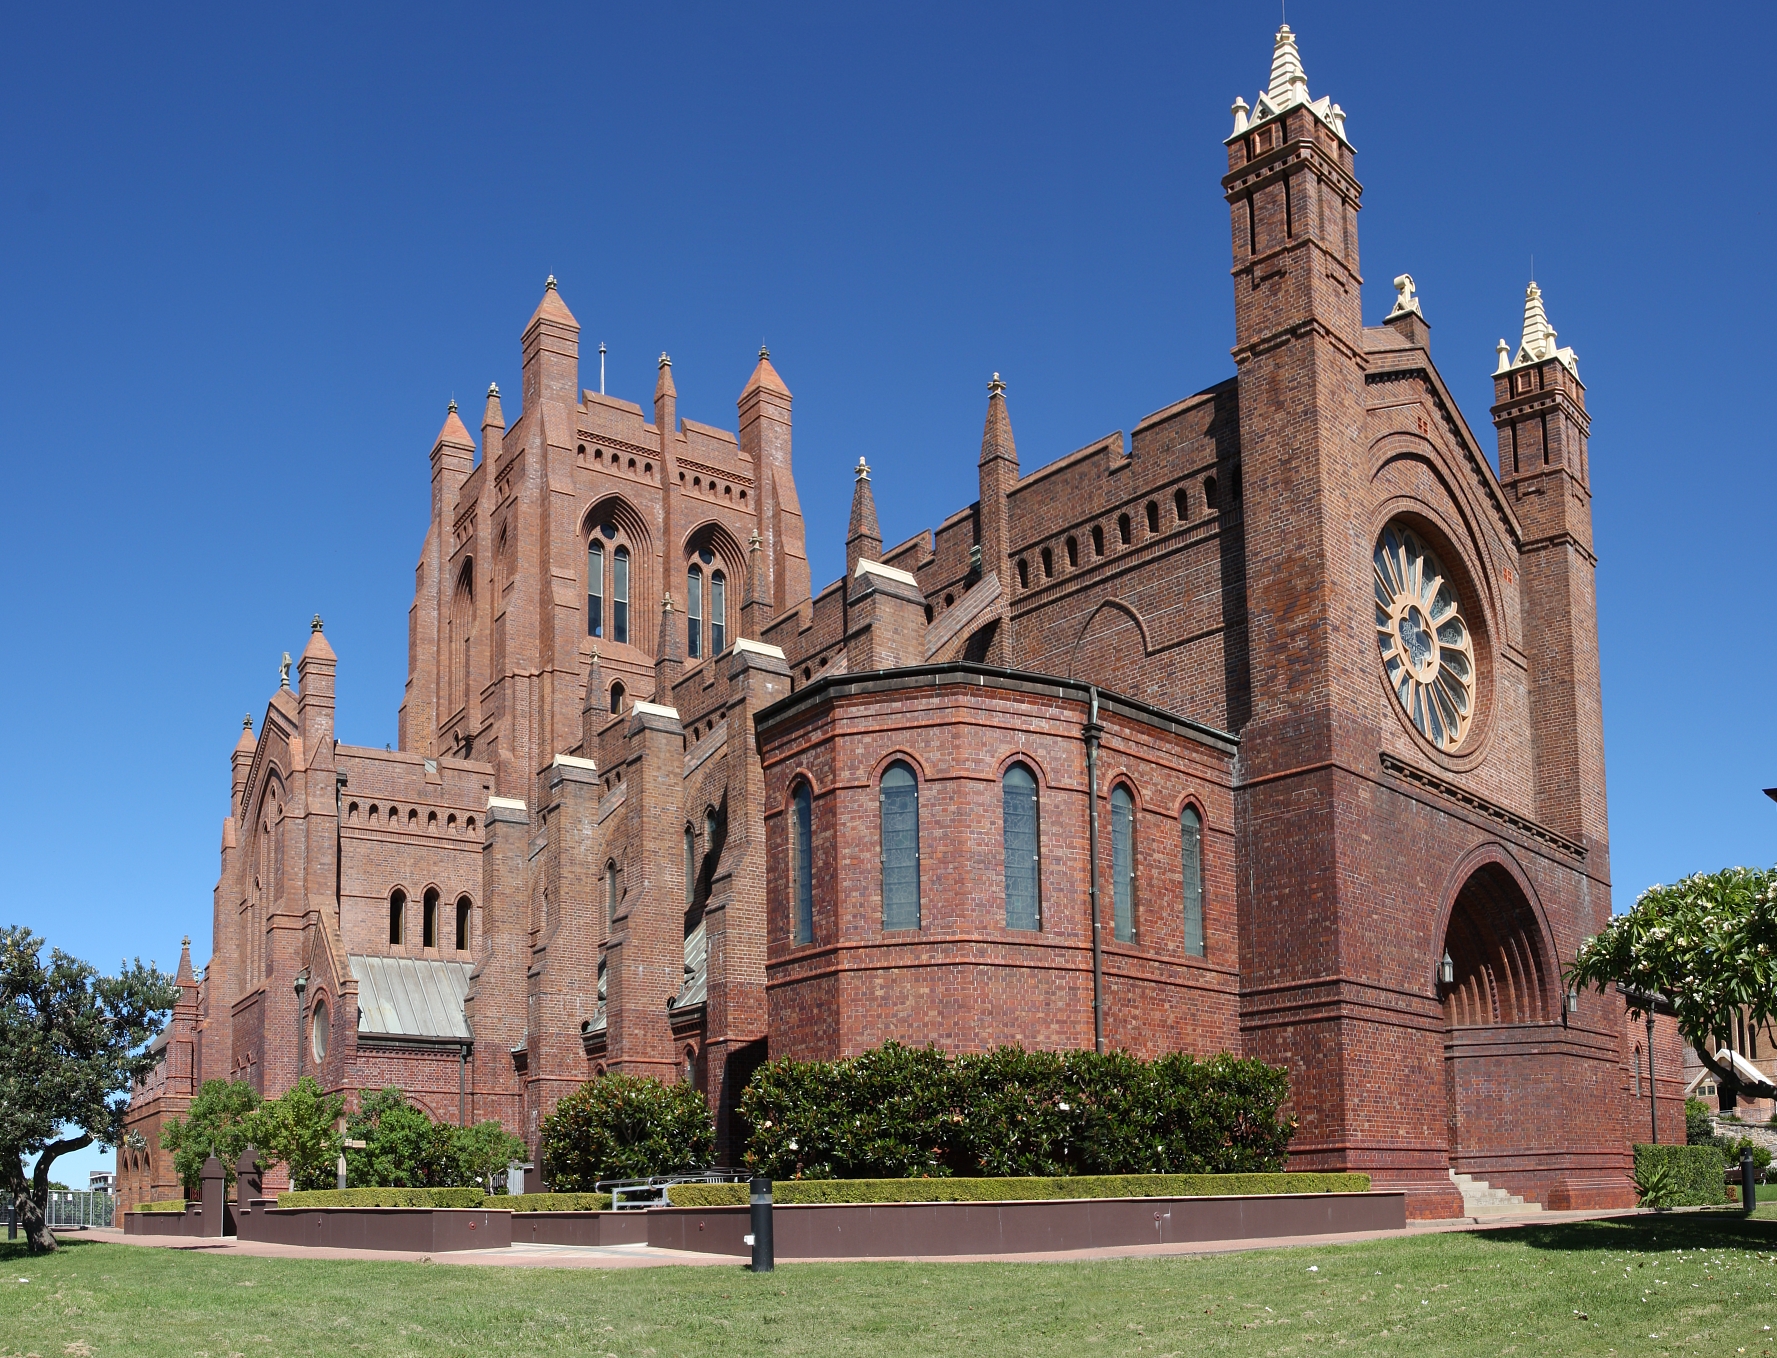 File:2 christ church cathedral.jpg - Wikimedia Commons